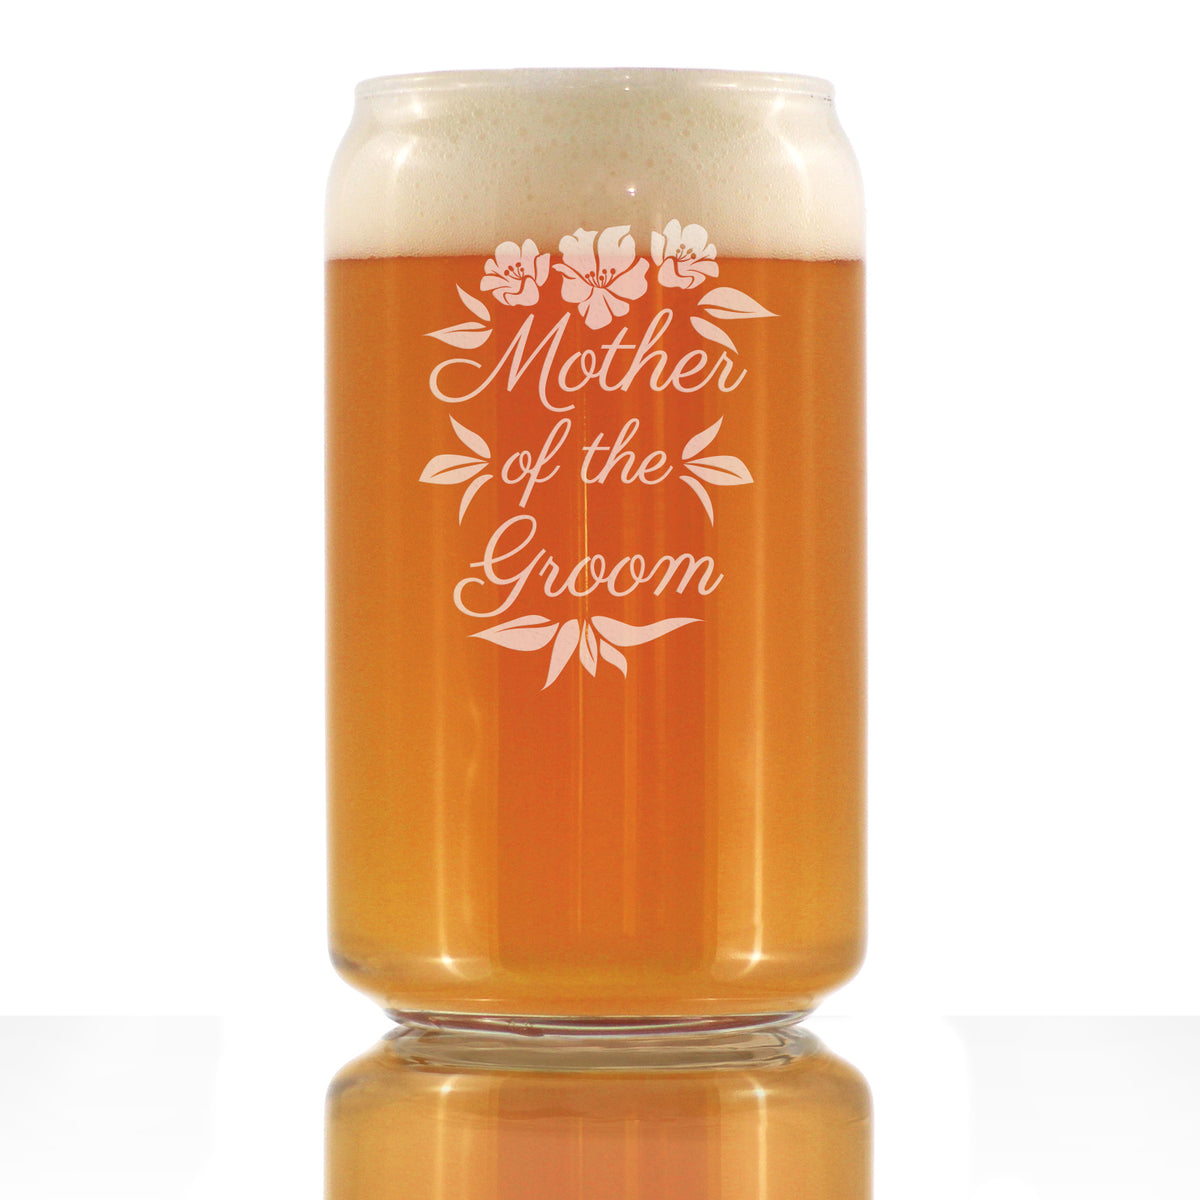 Mother of the Groom Beer Can Pint Glass - Unique Wedding Gift for Soon to Be Mother-in-Law - Cute Engraved Wedding Cup Gift